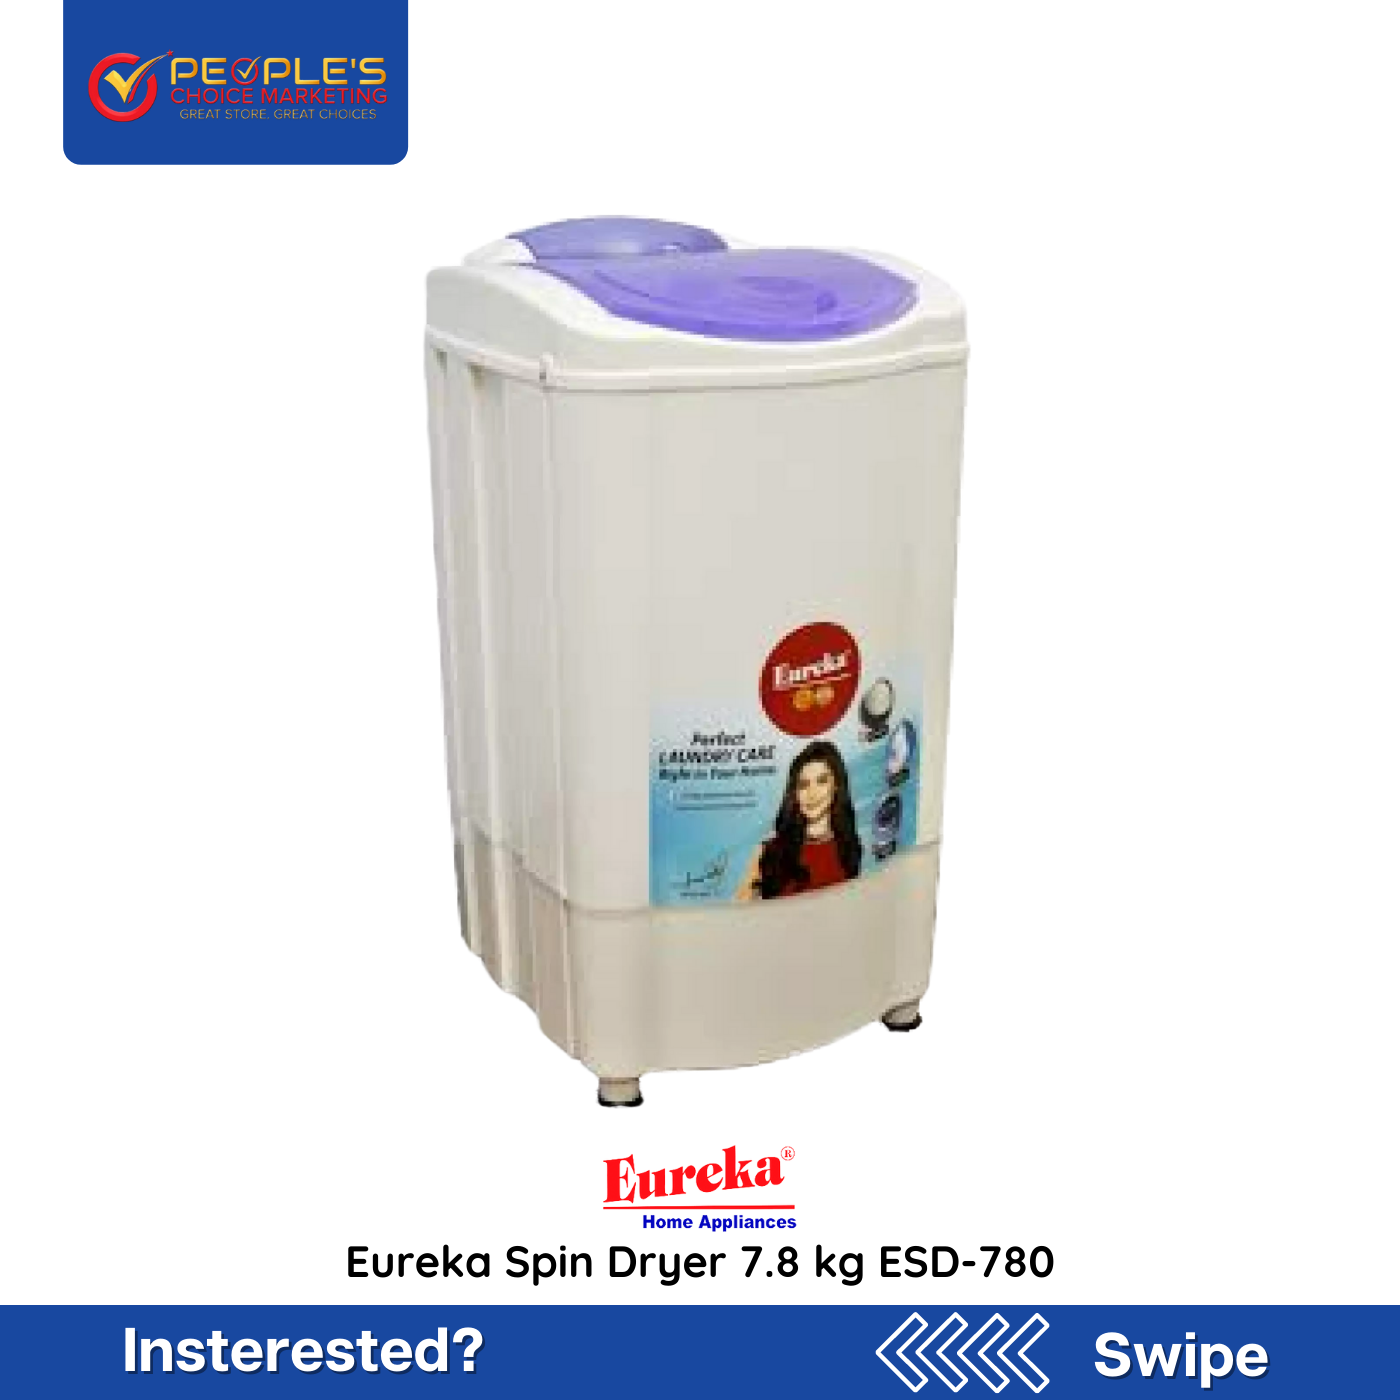 Eureka ESD-780  Spin Dryer 7.8kg - People's Choice Marketing